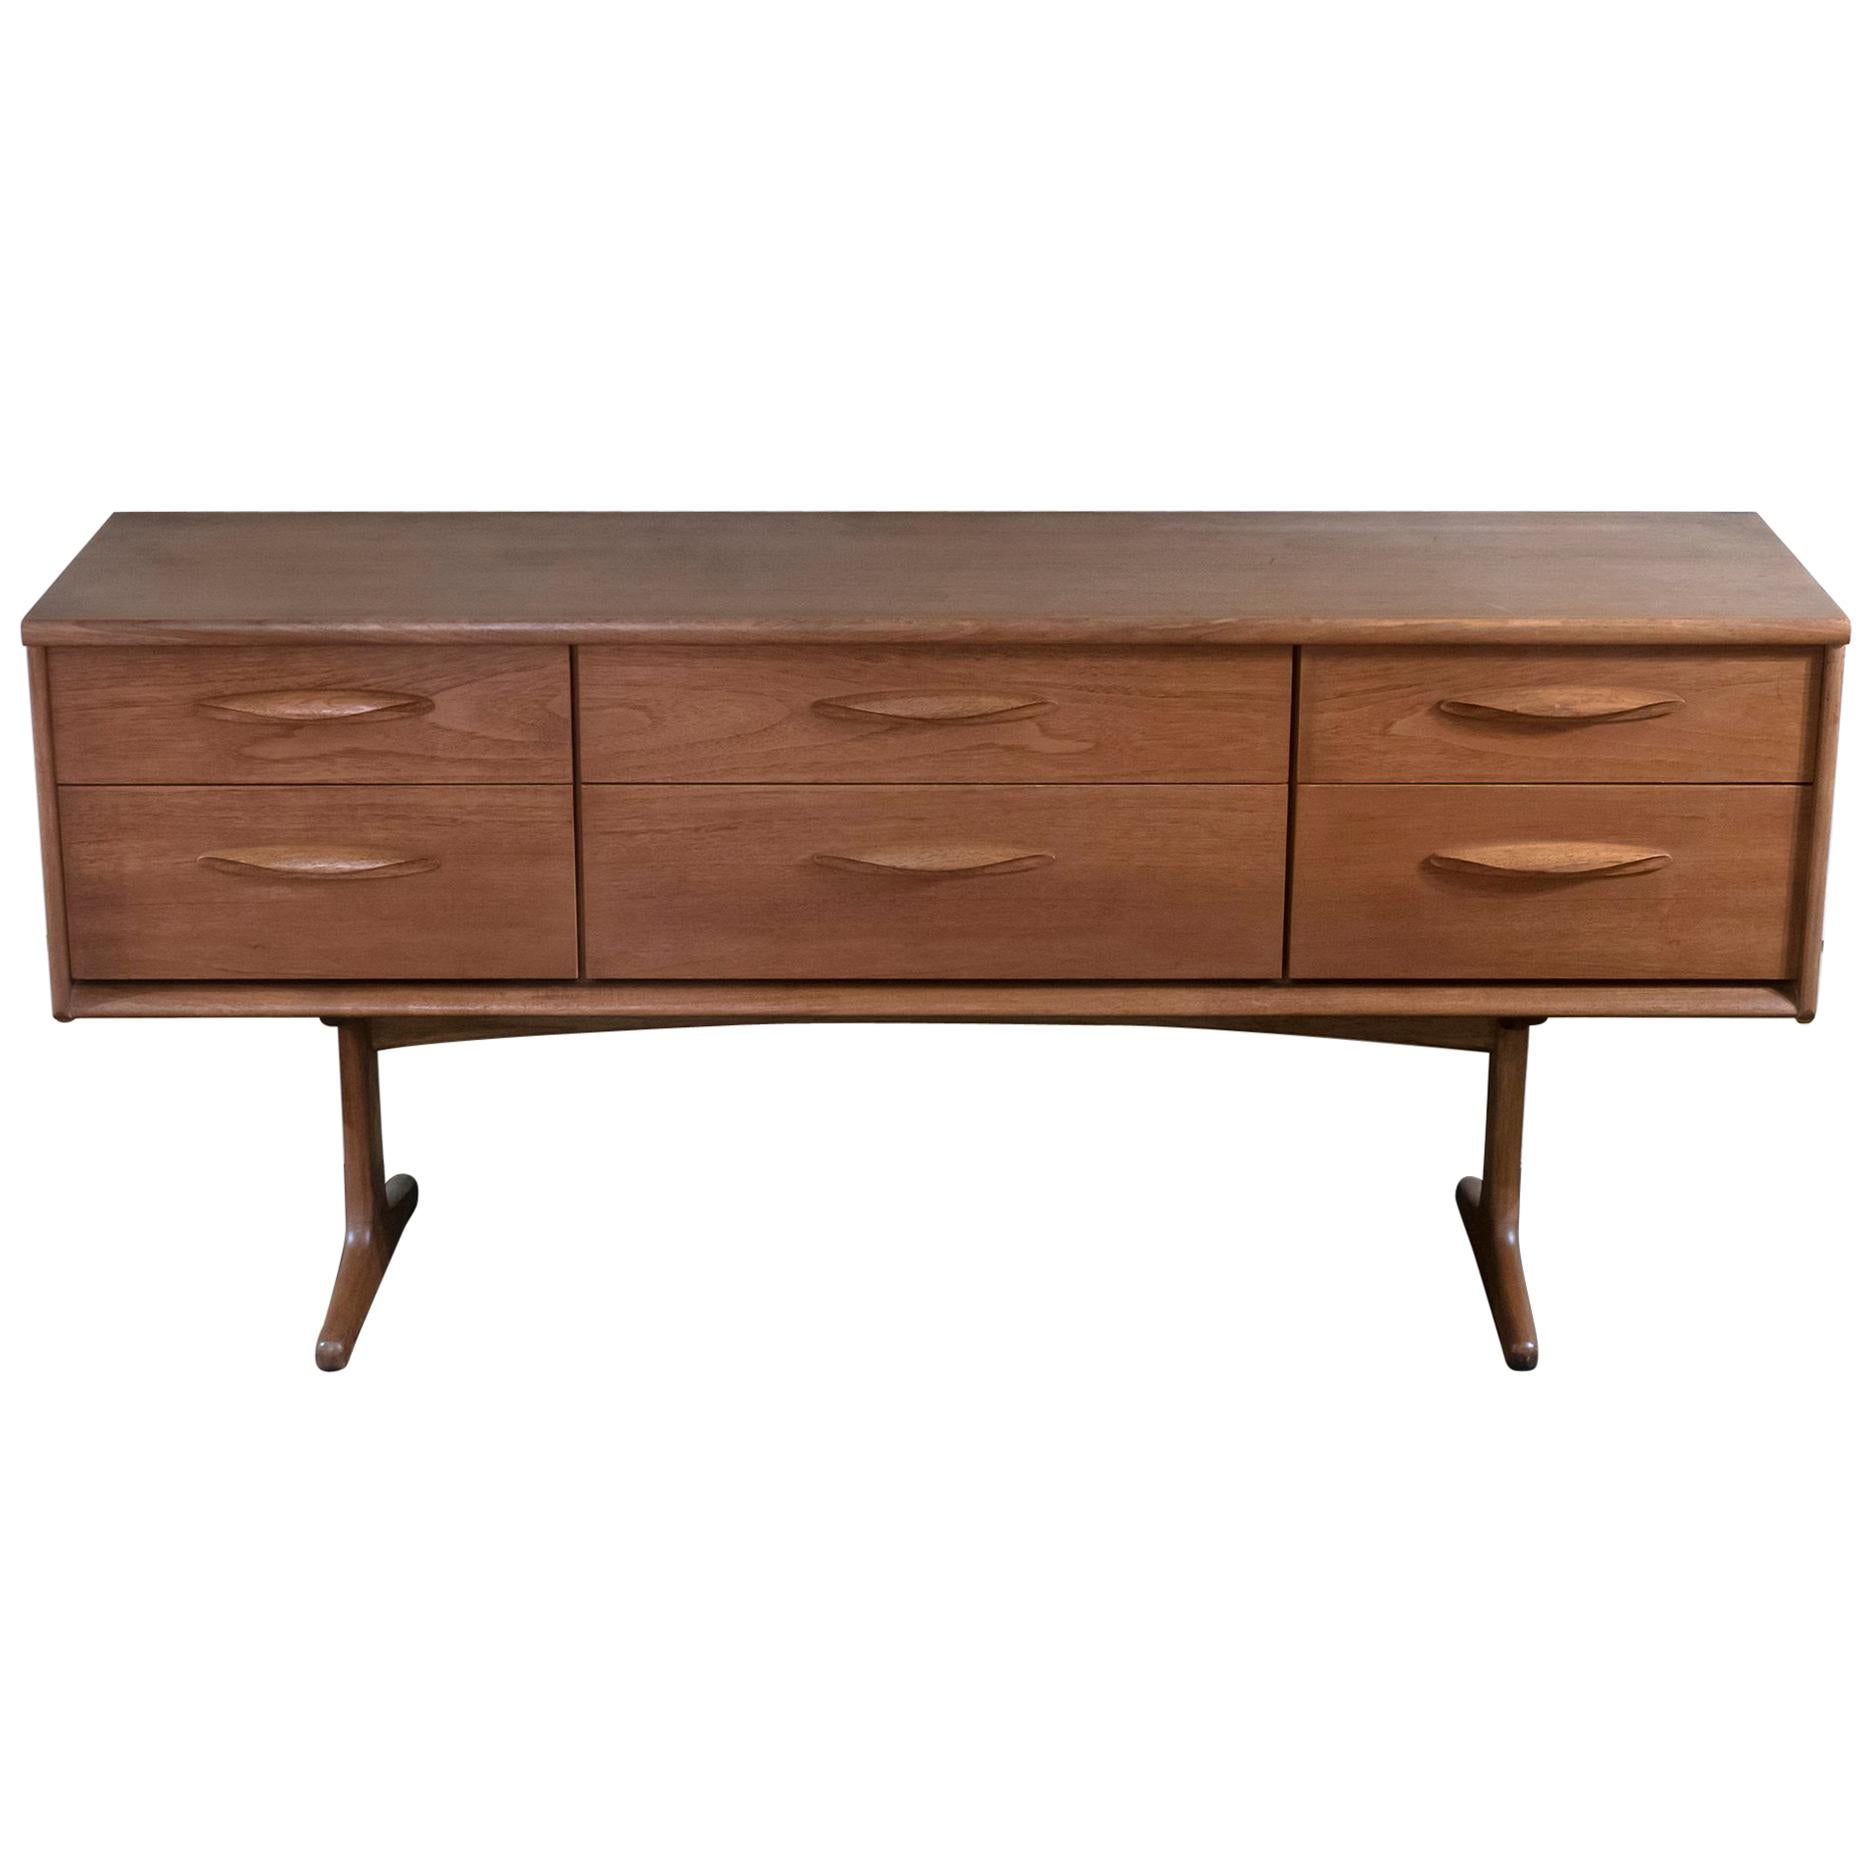 1960s English Teak Chest of Drawers by Austin Suite Ltd For Sale